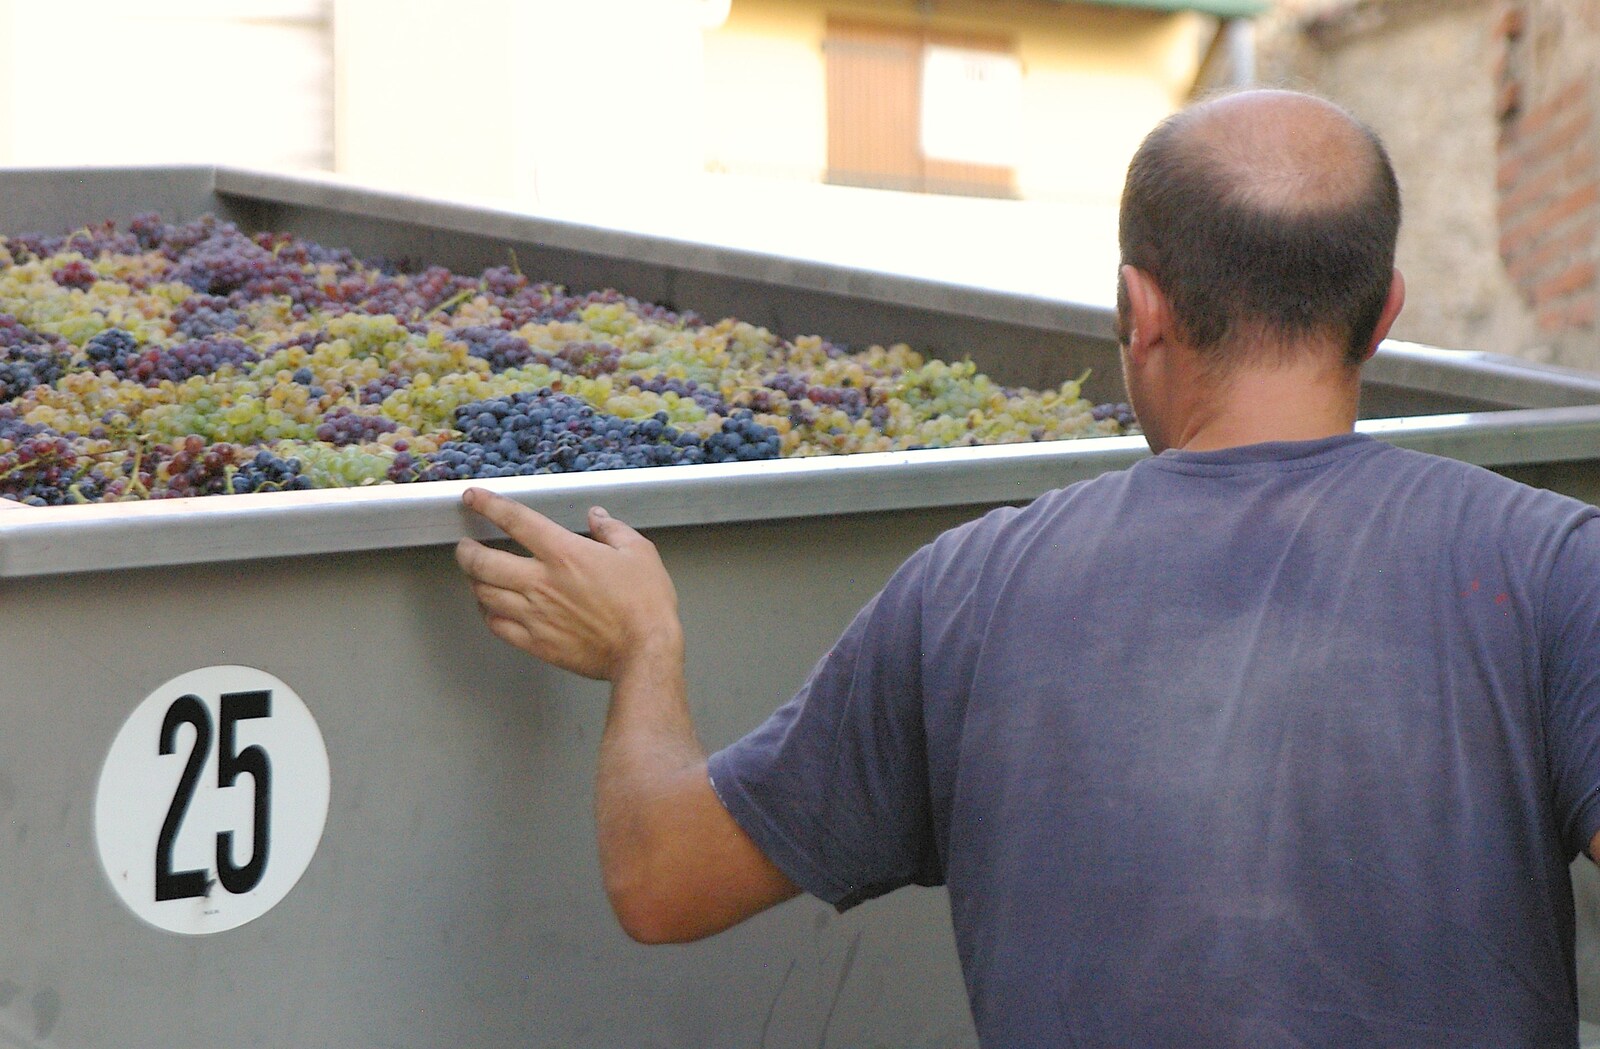 The grape harvest from Grape Picking and Pressing, Roussillon, France - 19th September 2006